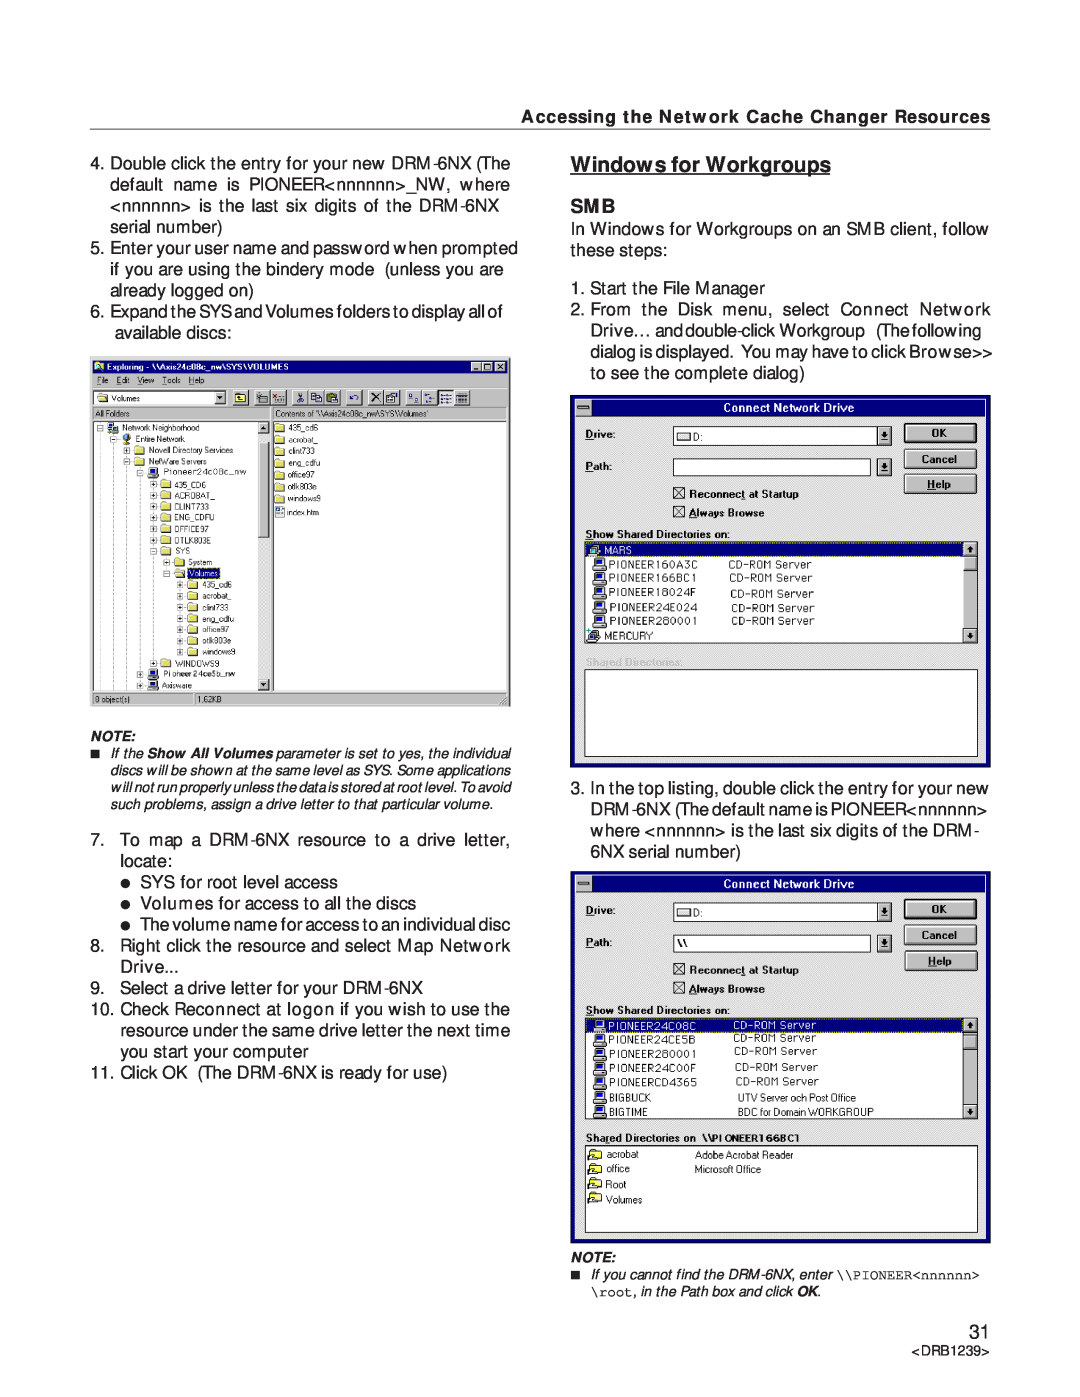 Pioneer DRM-6NX manual Windows for Workgroups, Accessing the Network Cache Changer Resources 